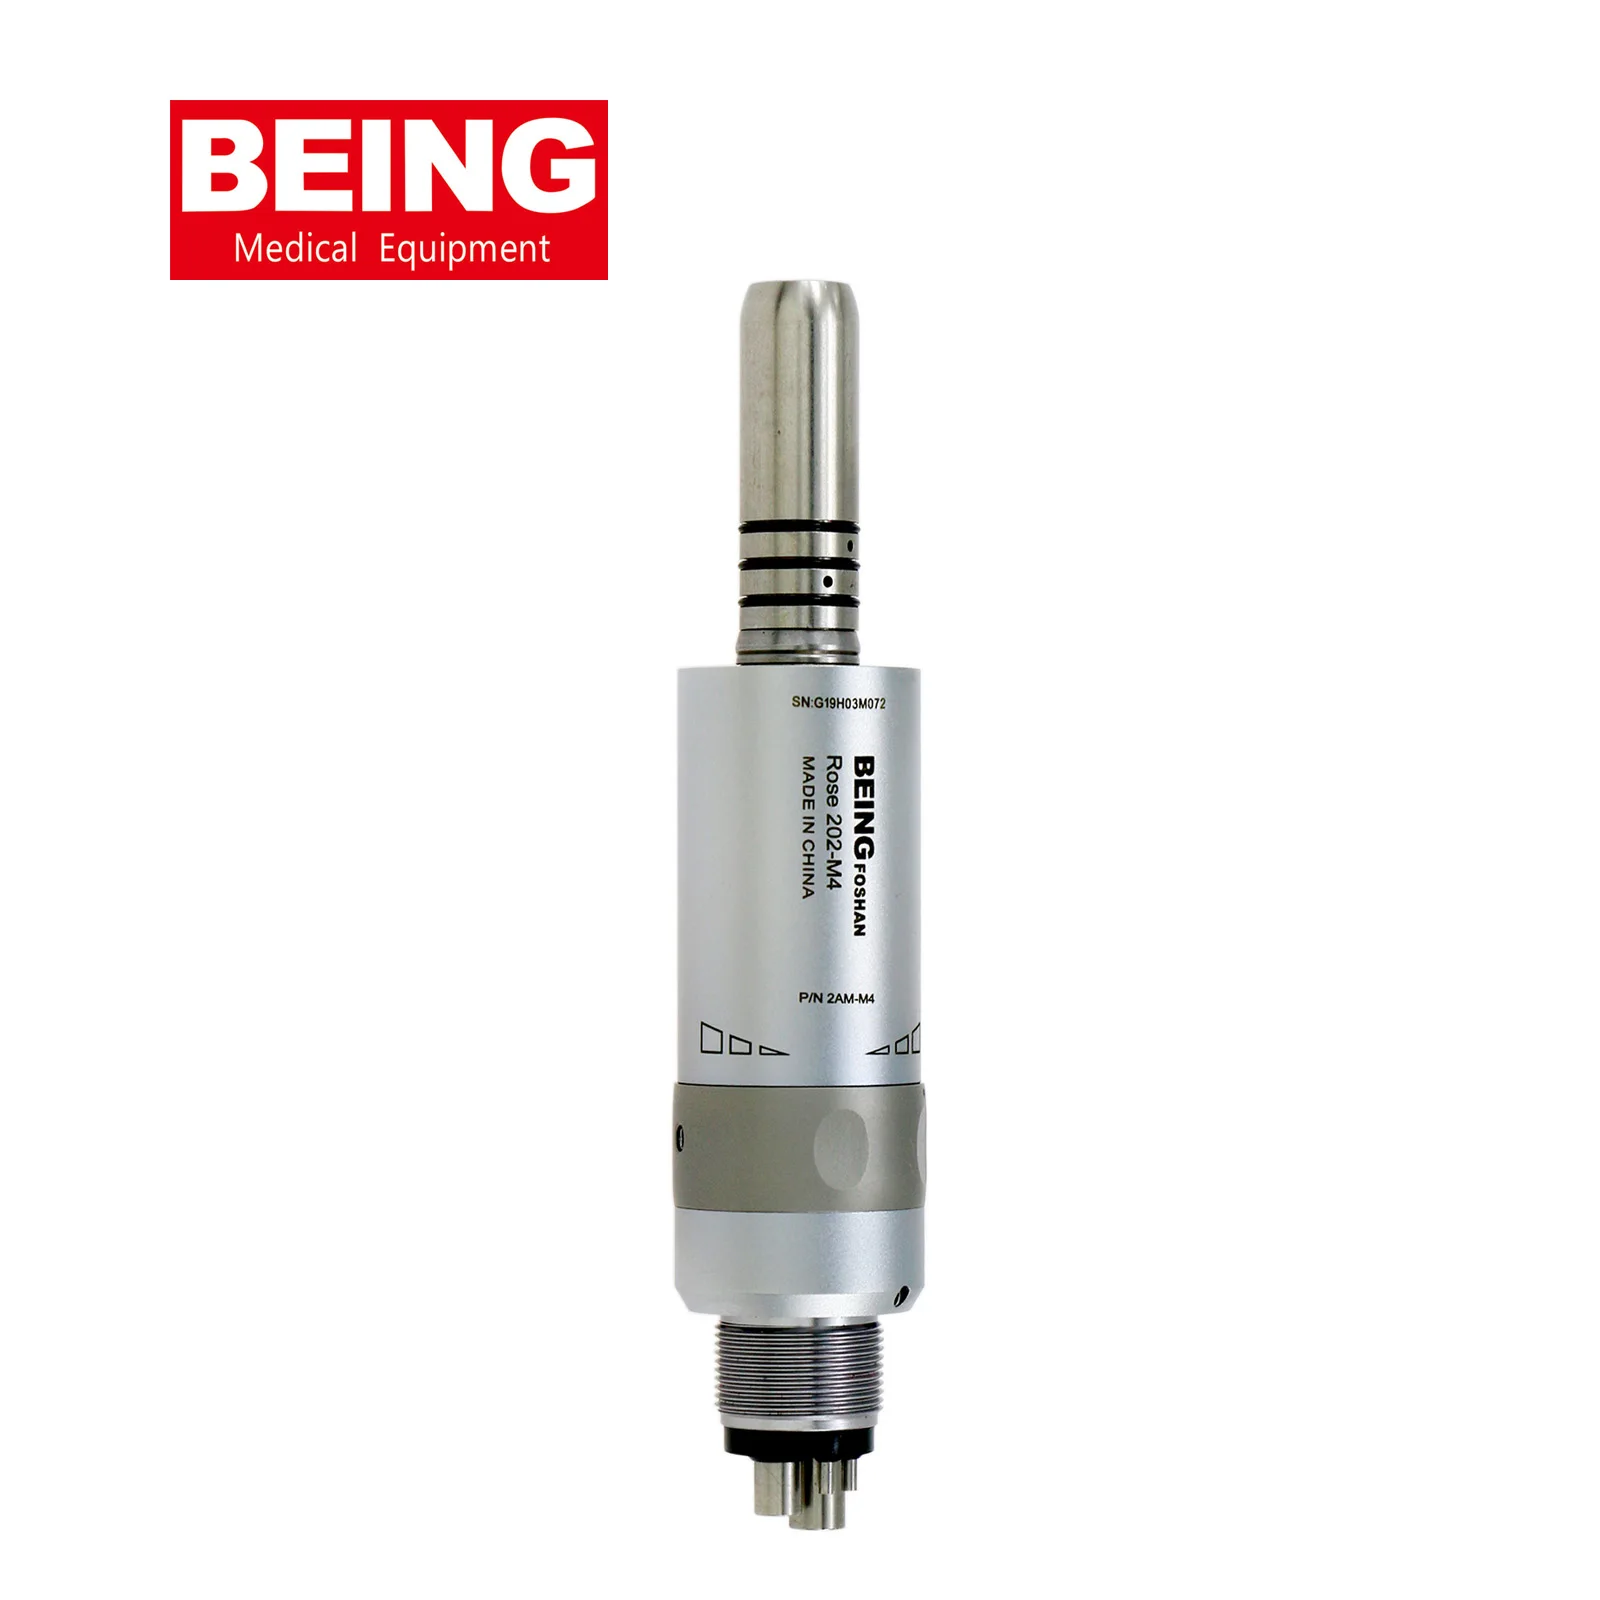 BEING Dental Inner Water E-type Air Motor Handpiece 4 Holes Rose 202 AM-M4 fit KaVo NSK